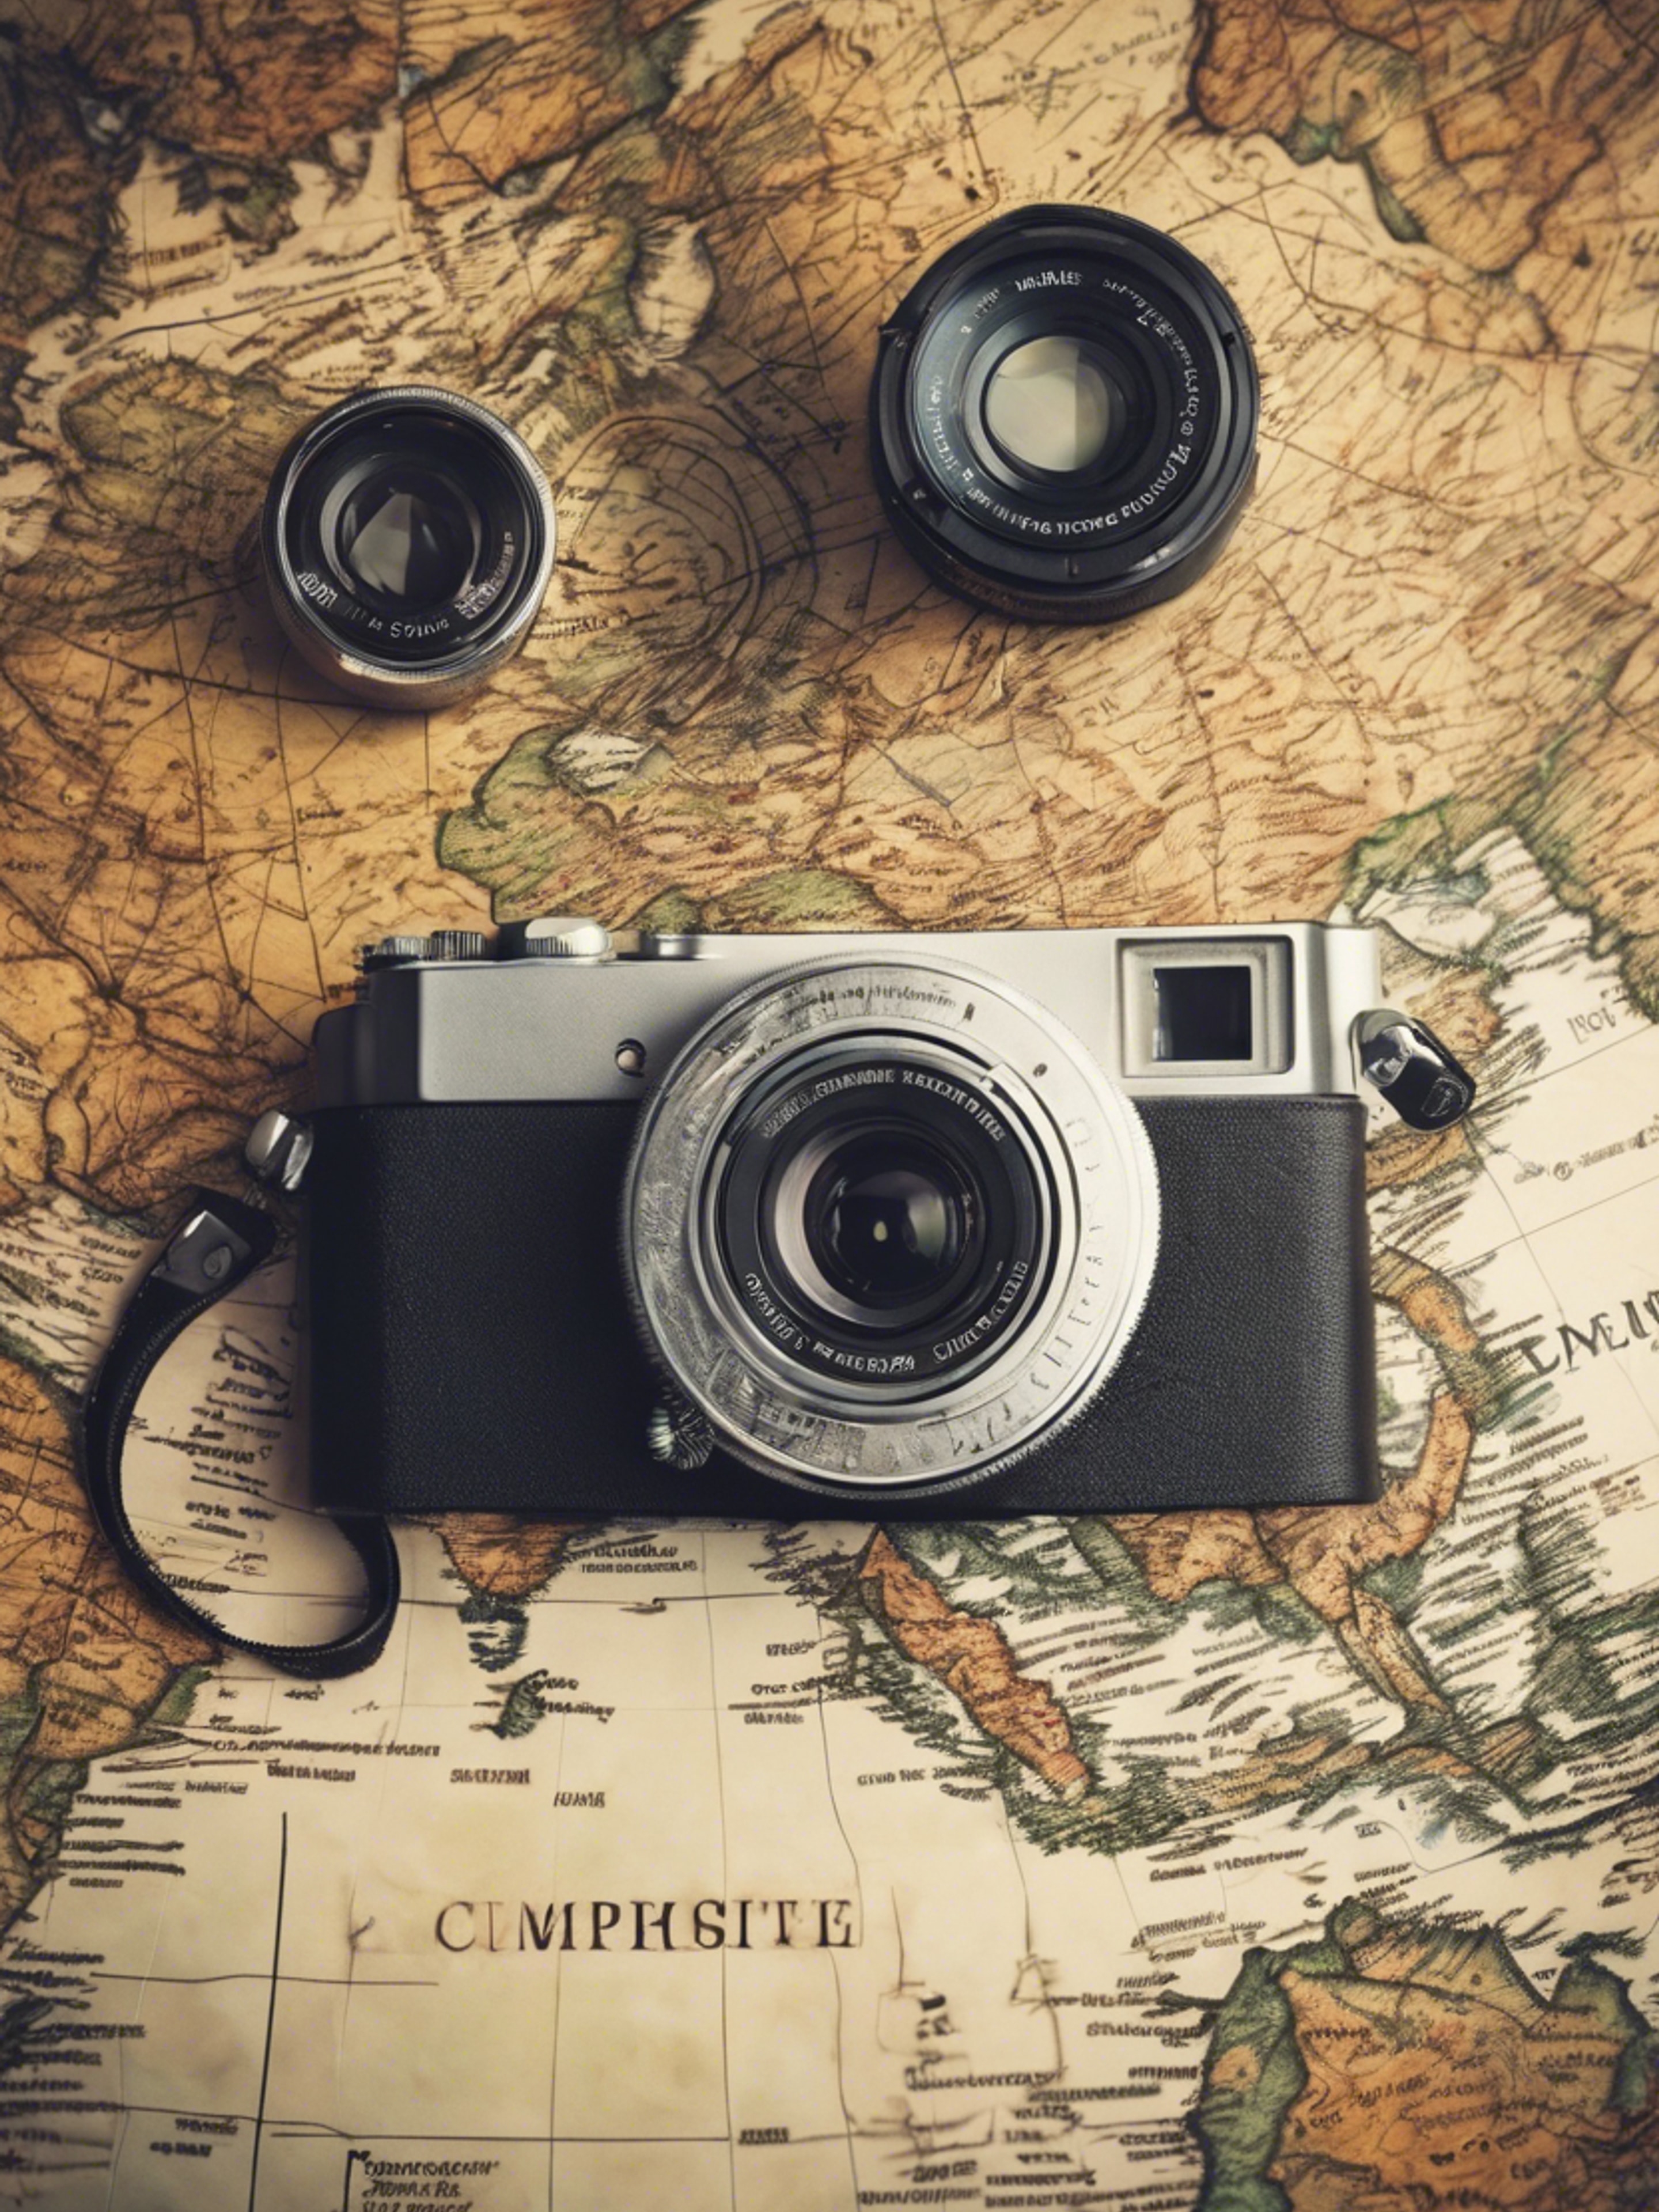 A compact camera with vintage design, placed on a world map to convey the spirit of travel. Ταπετσαρία[89e32525bdc346769ef4]